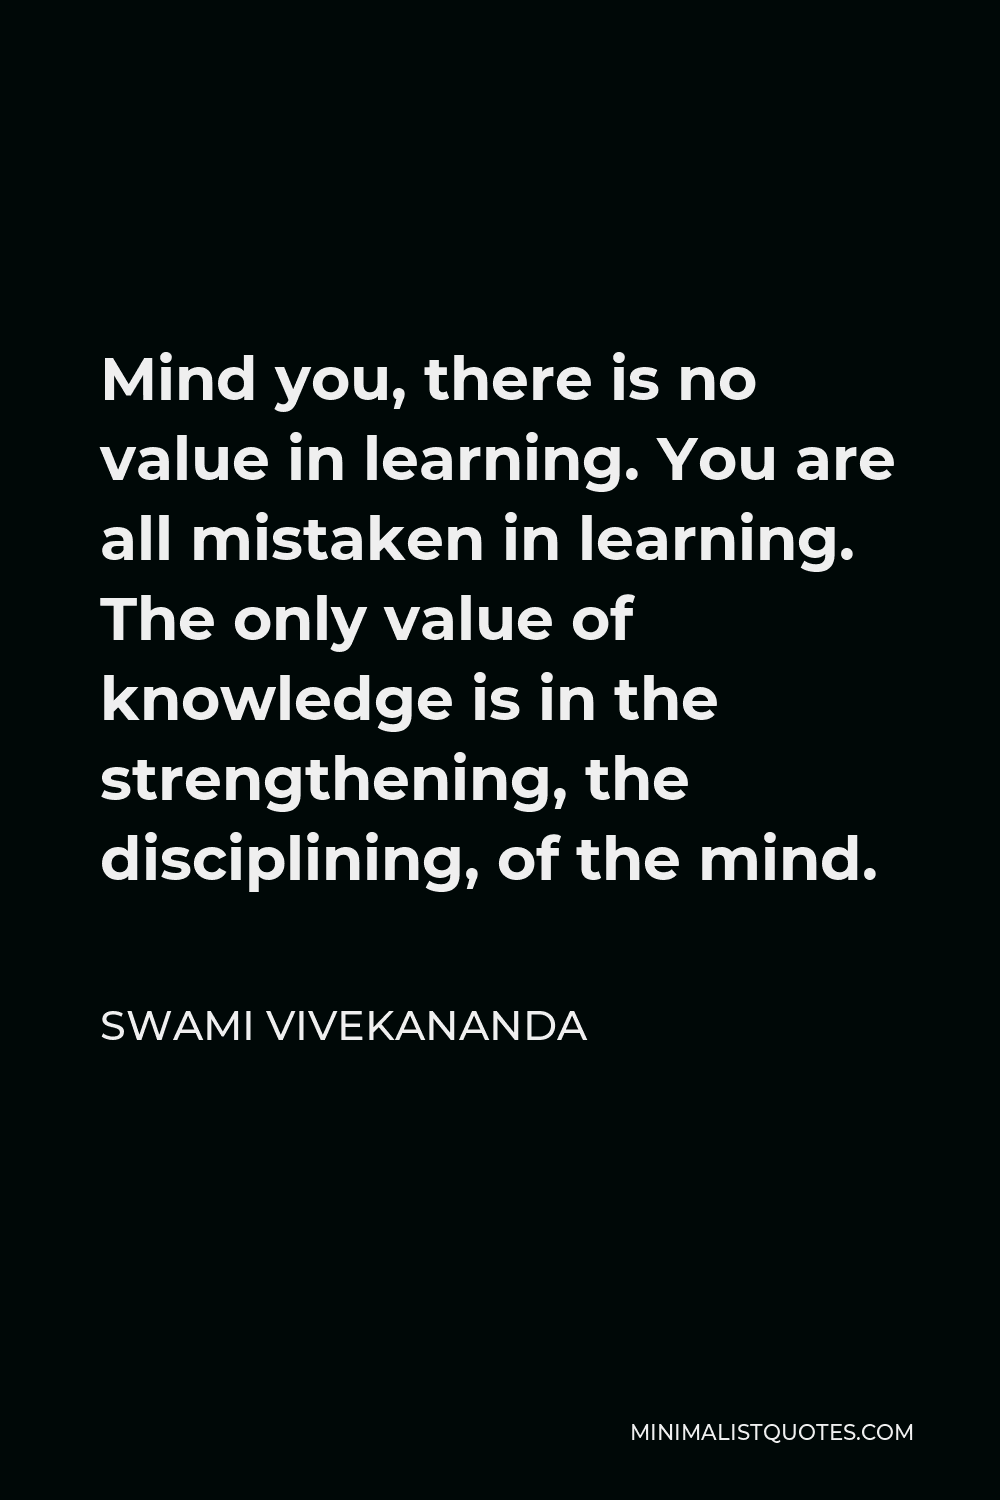 Swami Vivekananda Quote - Mind you, there is no value in learning. You are all mistaken in learning. The only value of knowledge is in the strengthening, the disciplining, of the mind.